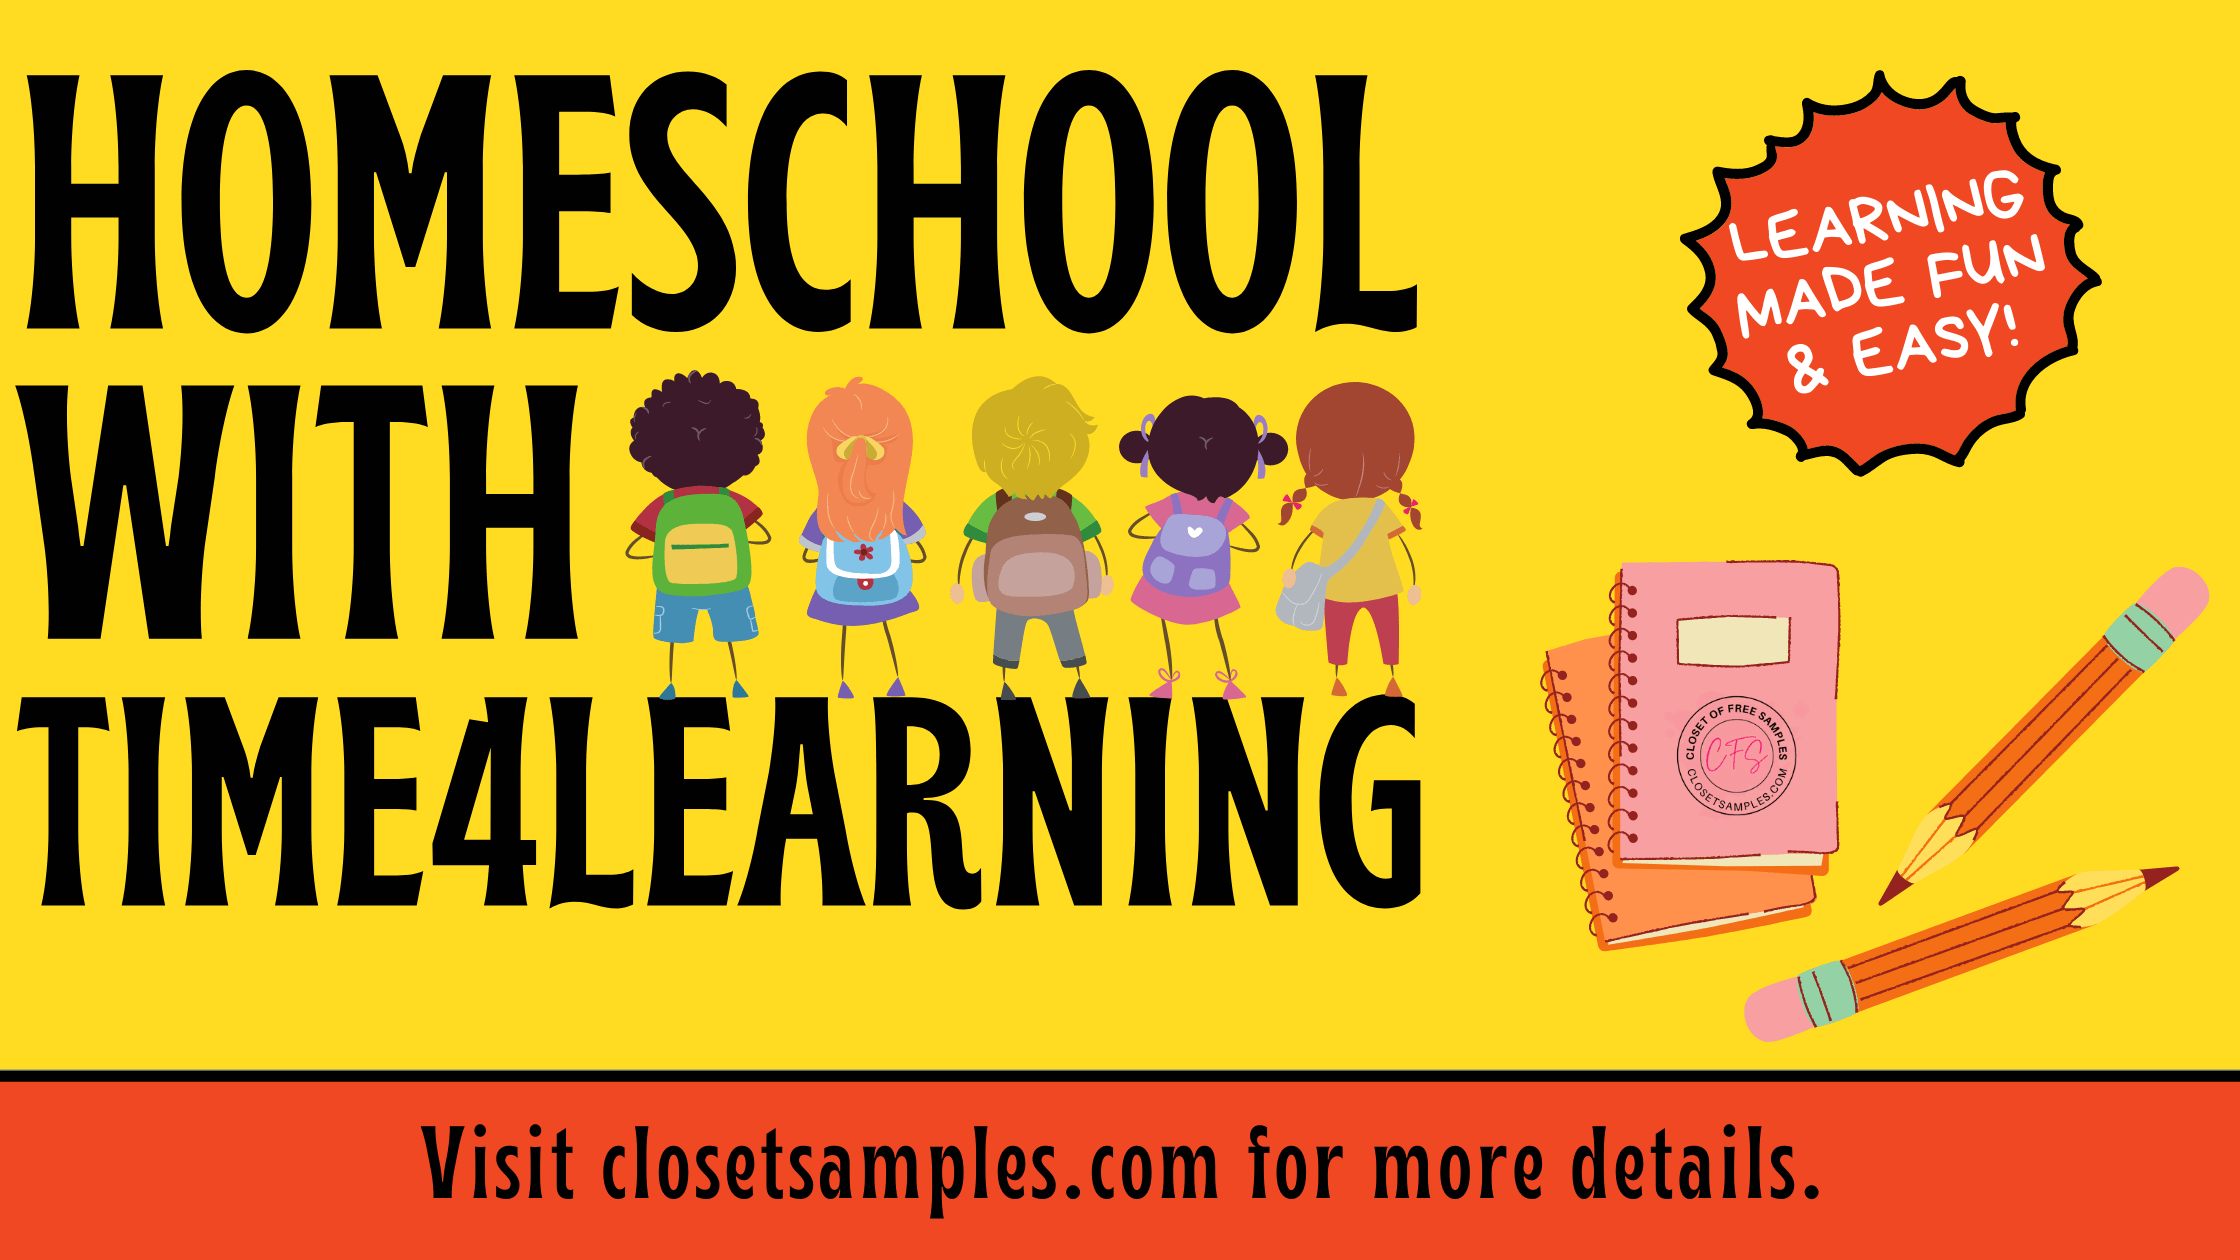 Homeschool-with-Time4Learning-Try-FREE-Closetsamples-virtual-learning-2021.png